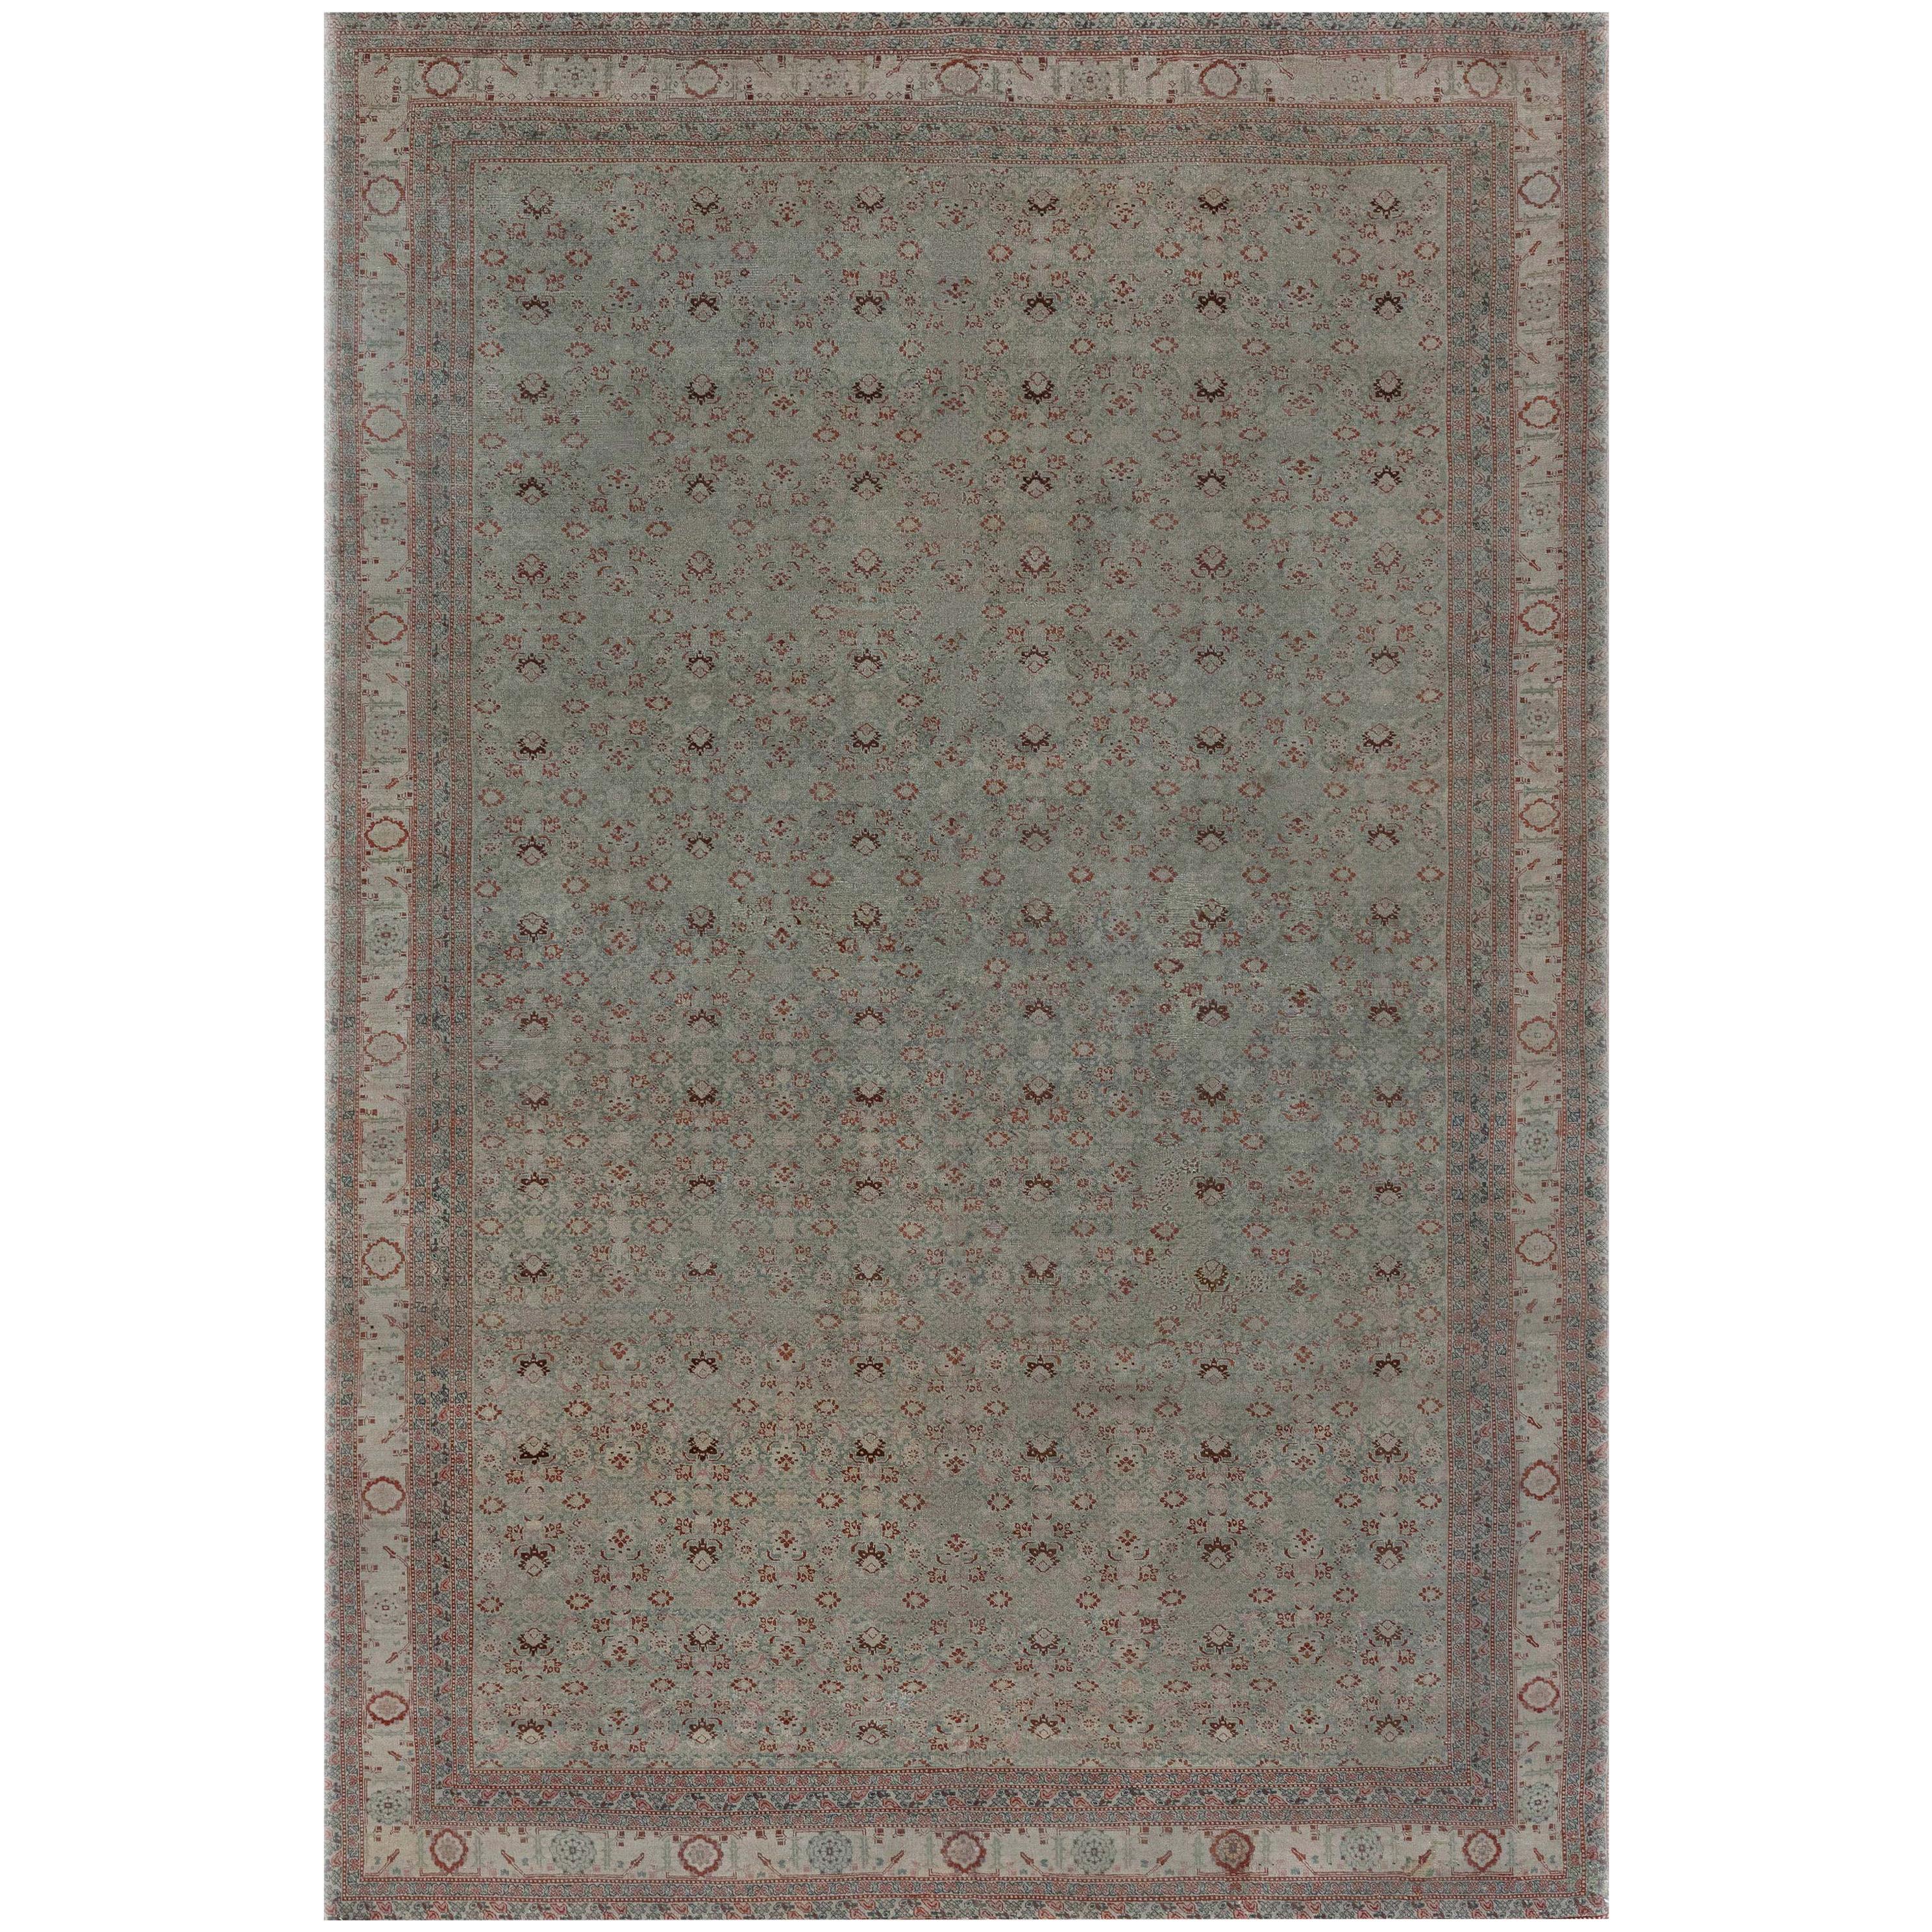 Authentic 19th Century Persian Tabriz Rug For Sale